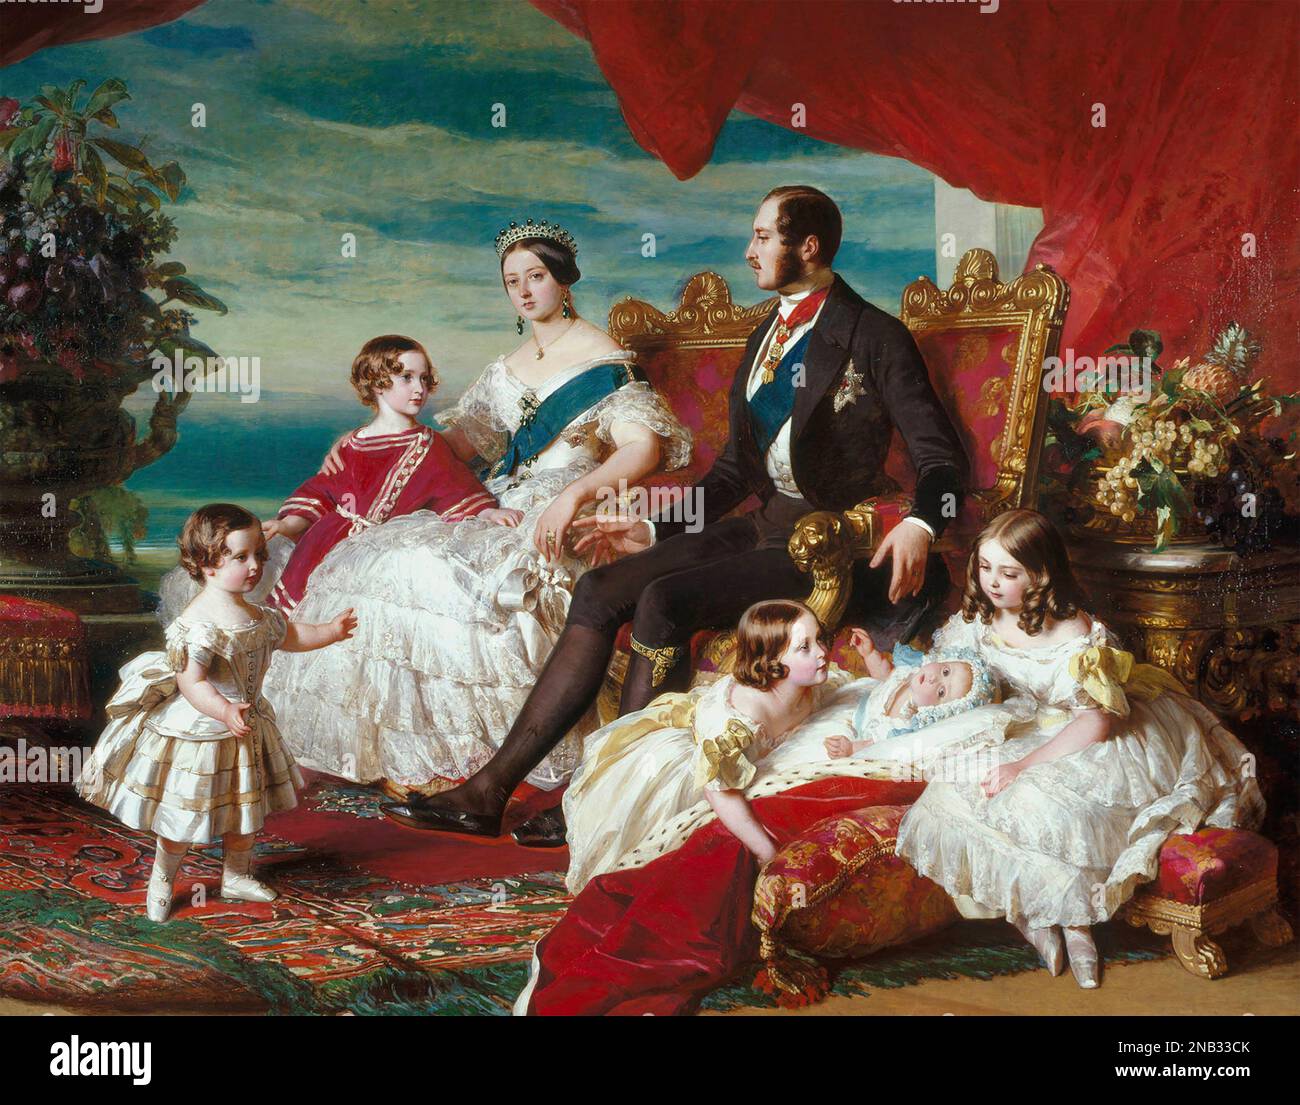 Image of Portraits of Empress Eugenie and Imperial Prince. Eugenie de  Montijo by Winterhalter, Franz Xaver (1805-73)